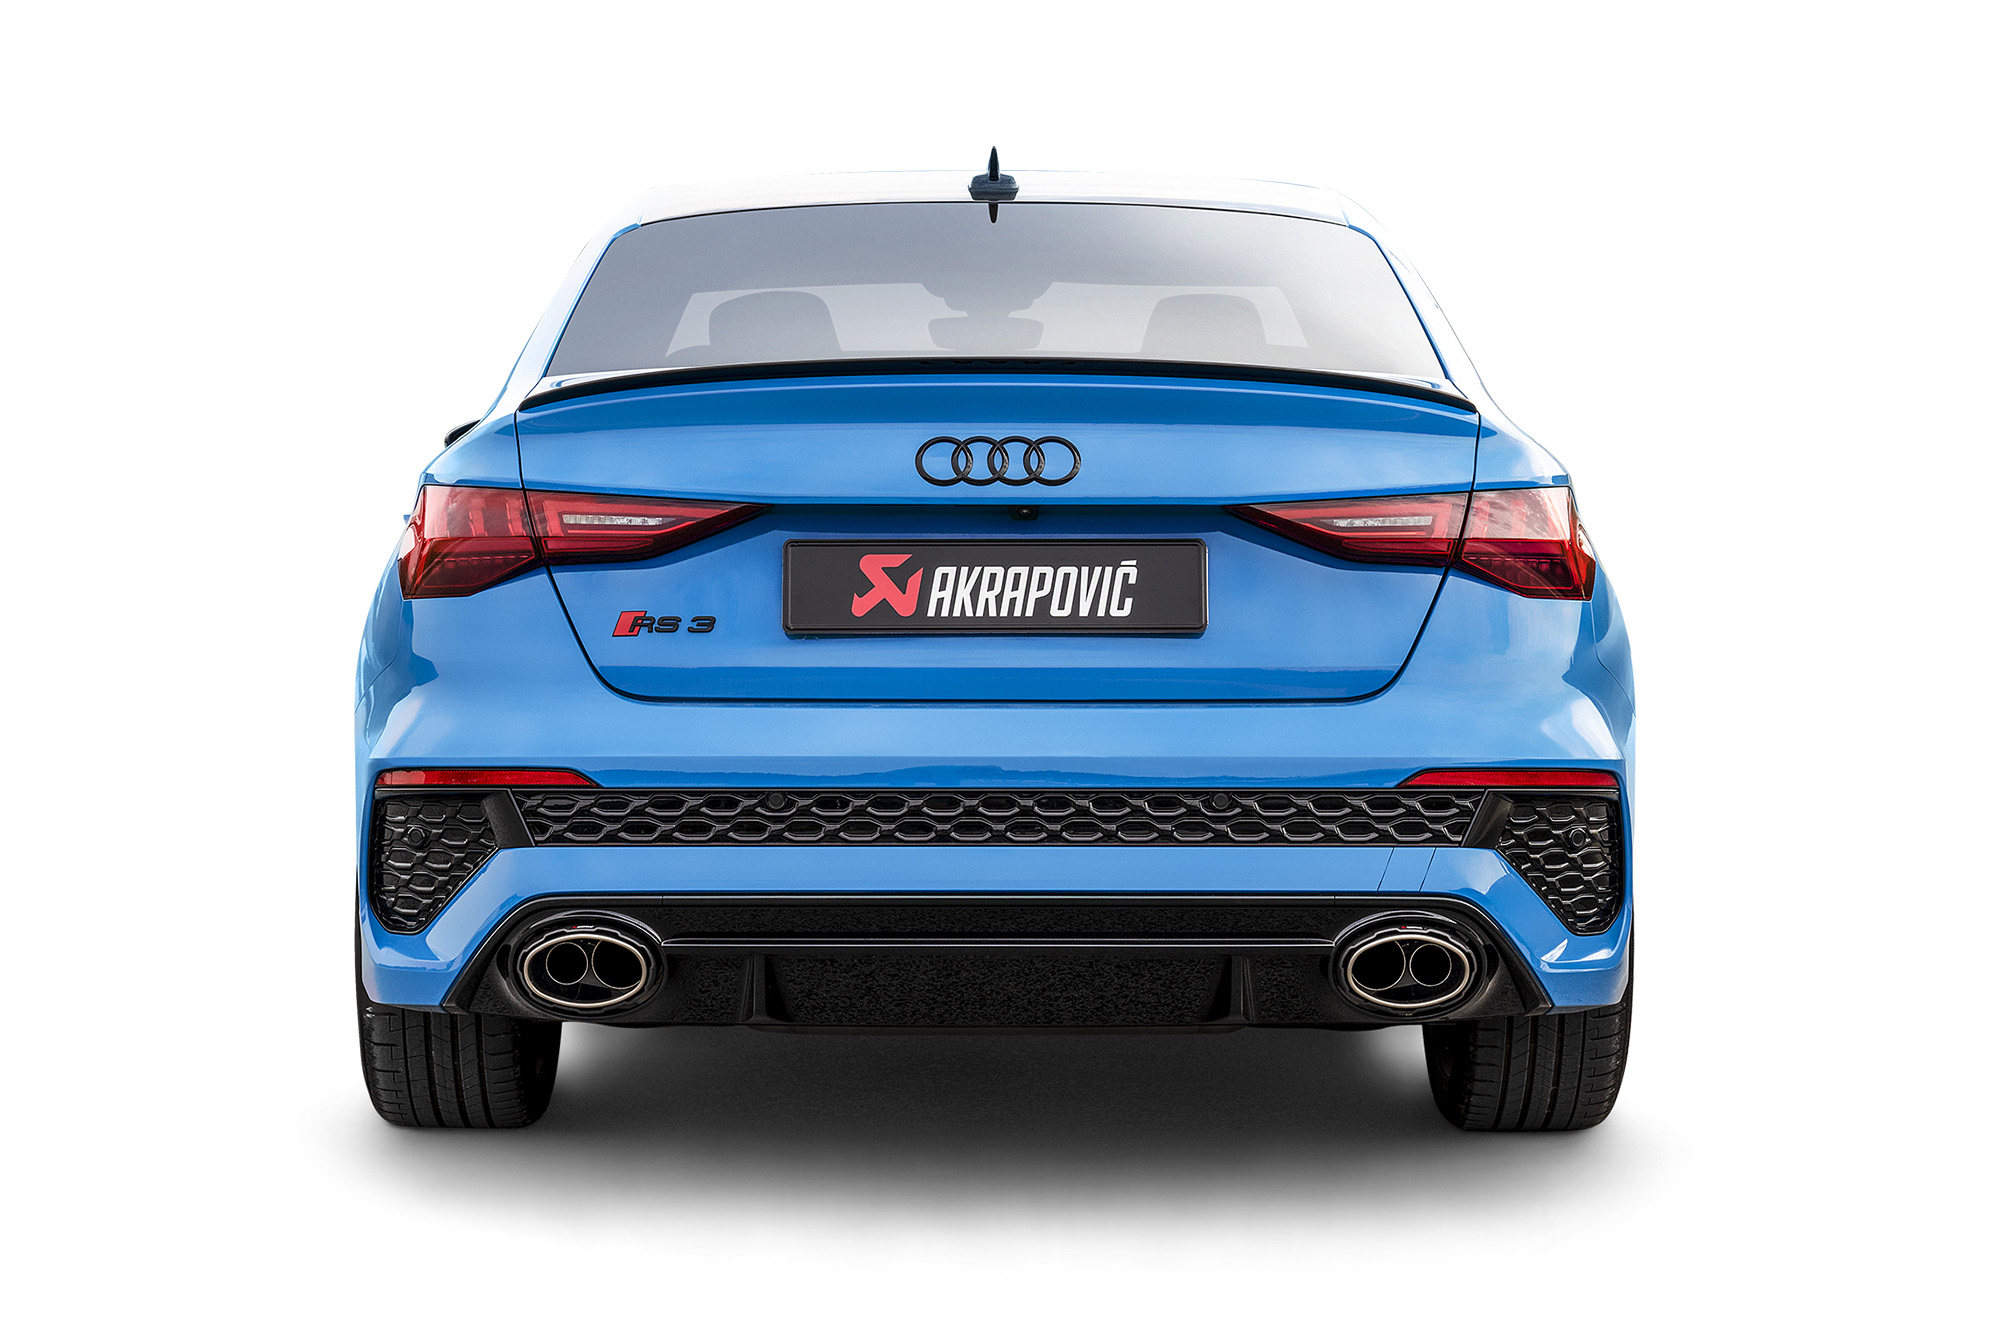 Audi RS3 Akrapovic Exhaust System Carbonwurks Poole Bournemouth Dorset